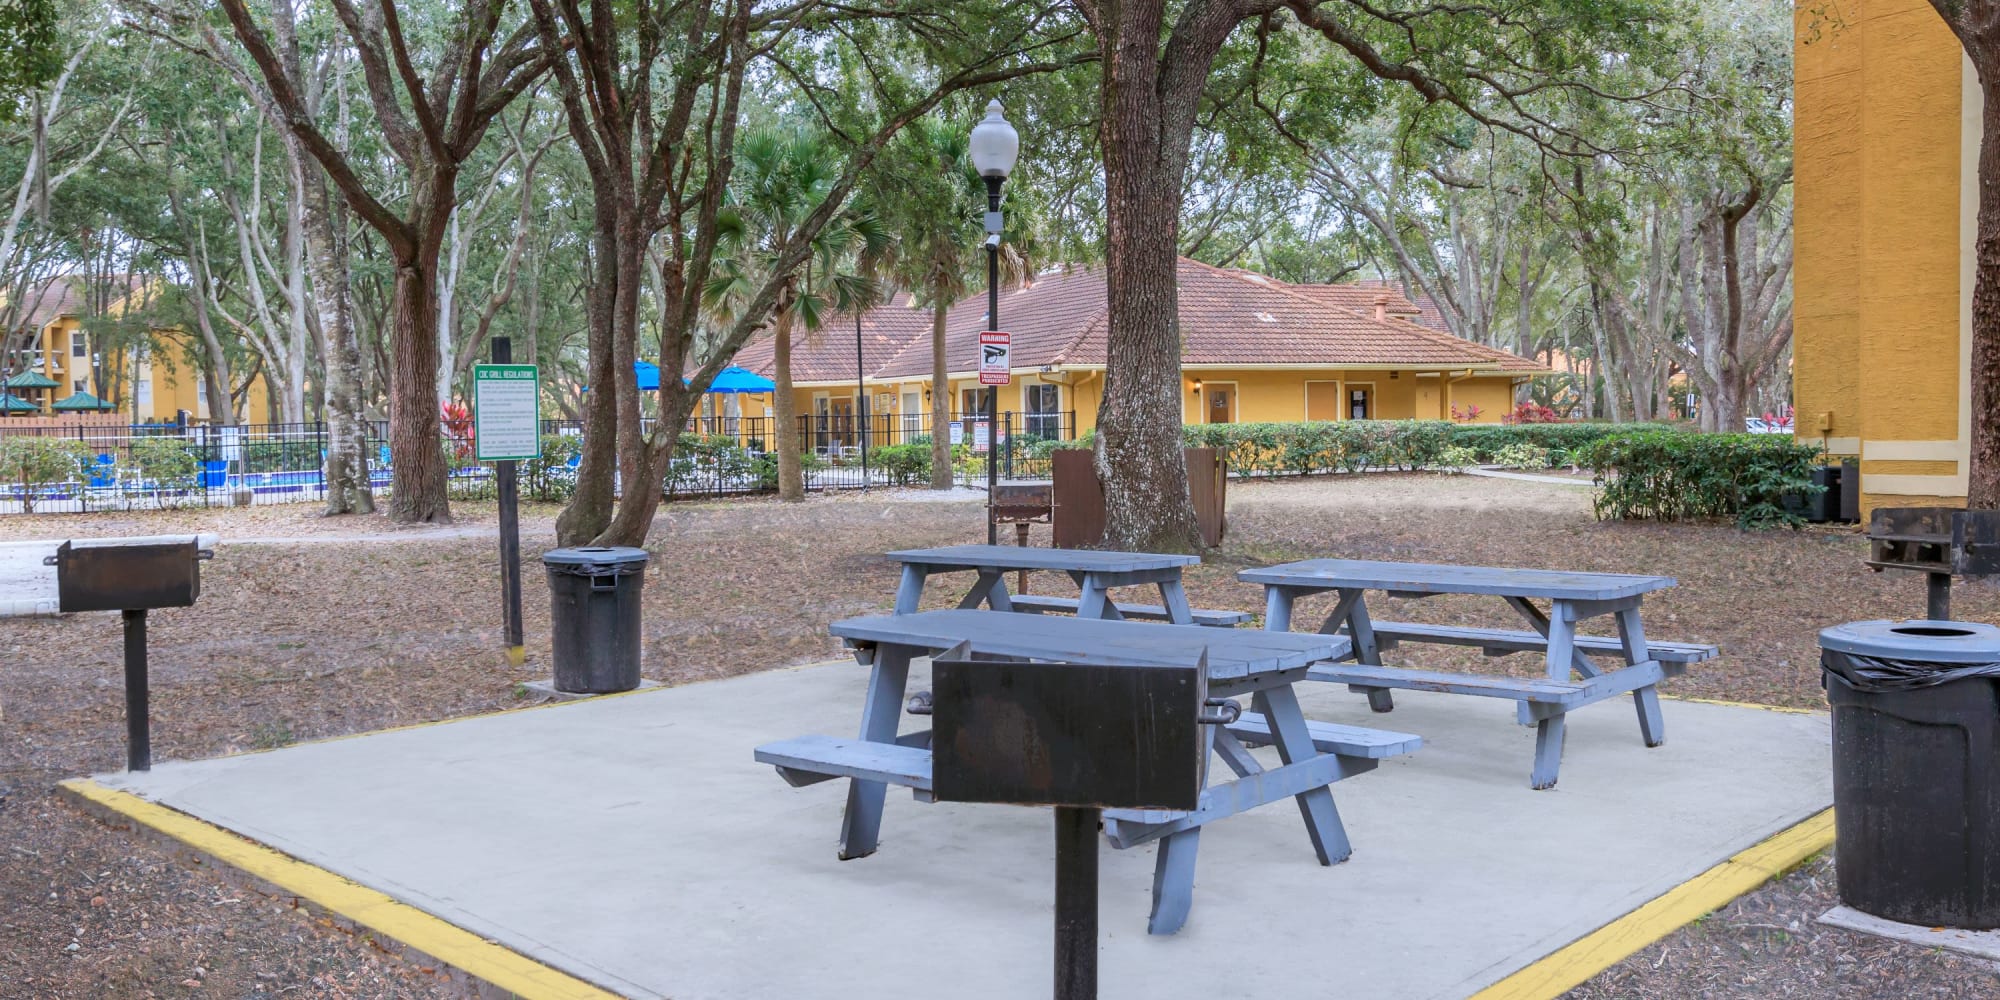 Picnic area at Images Condominiums in Kissimmee, Florida